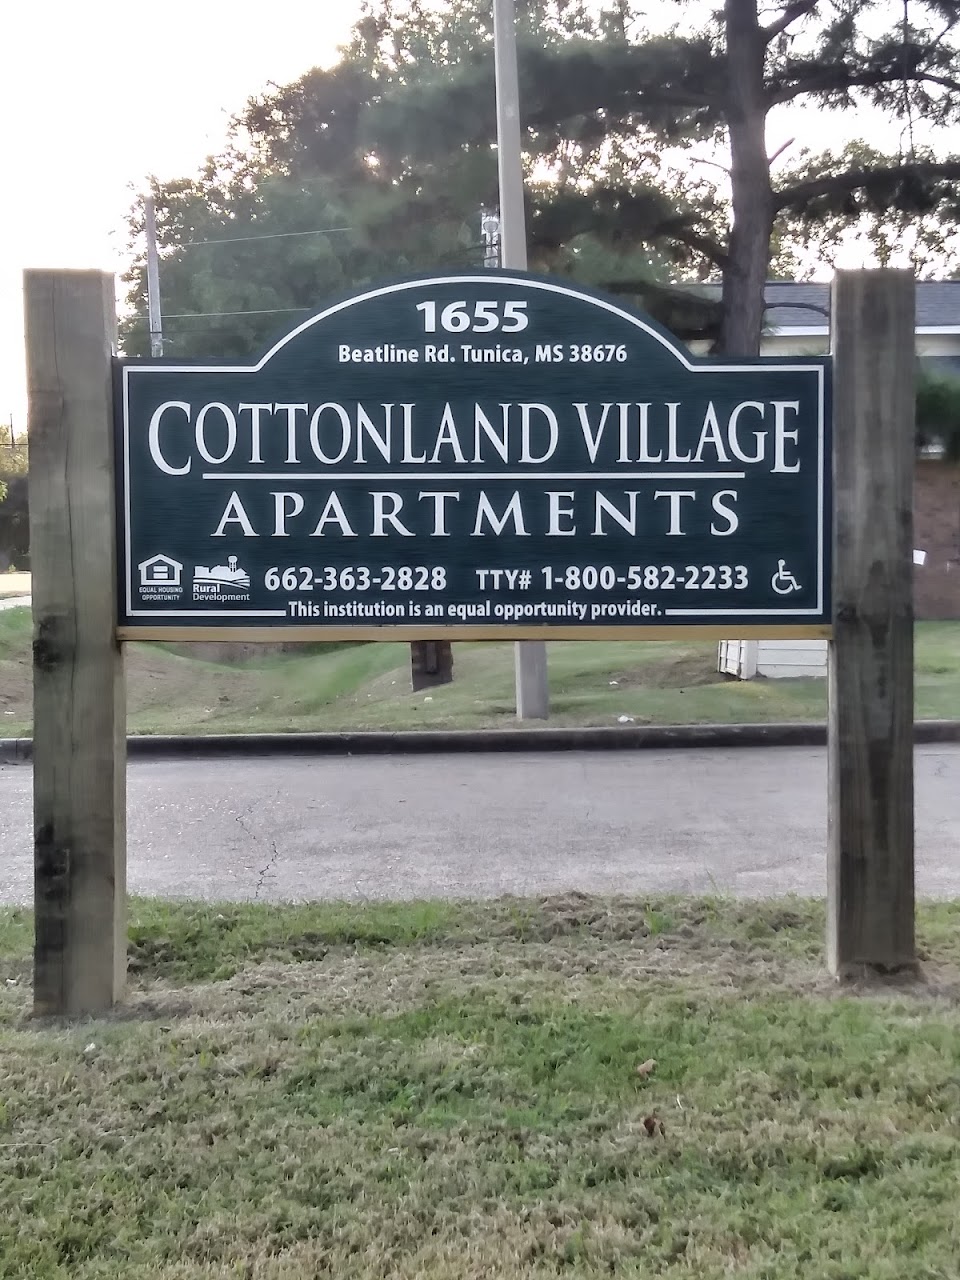 Photo of COTTONLAND VILLAGE. Affordable housing located at 1655 BEATLINE RD TUNICA, MS 38676